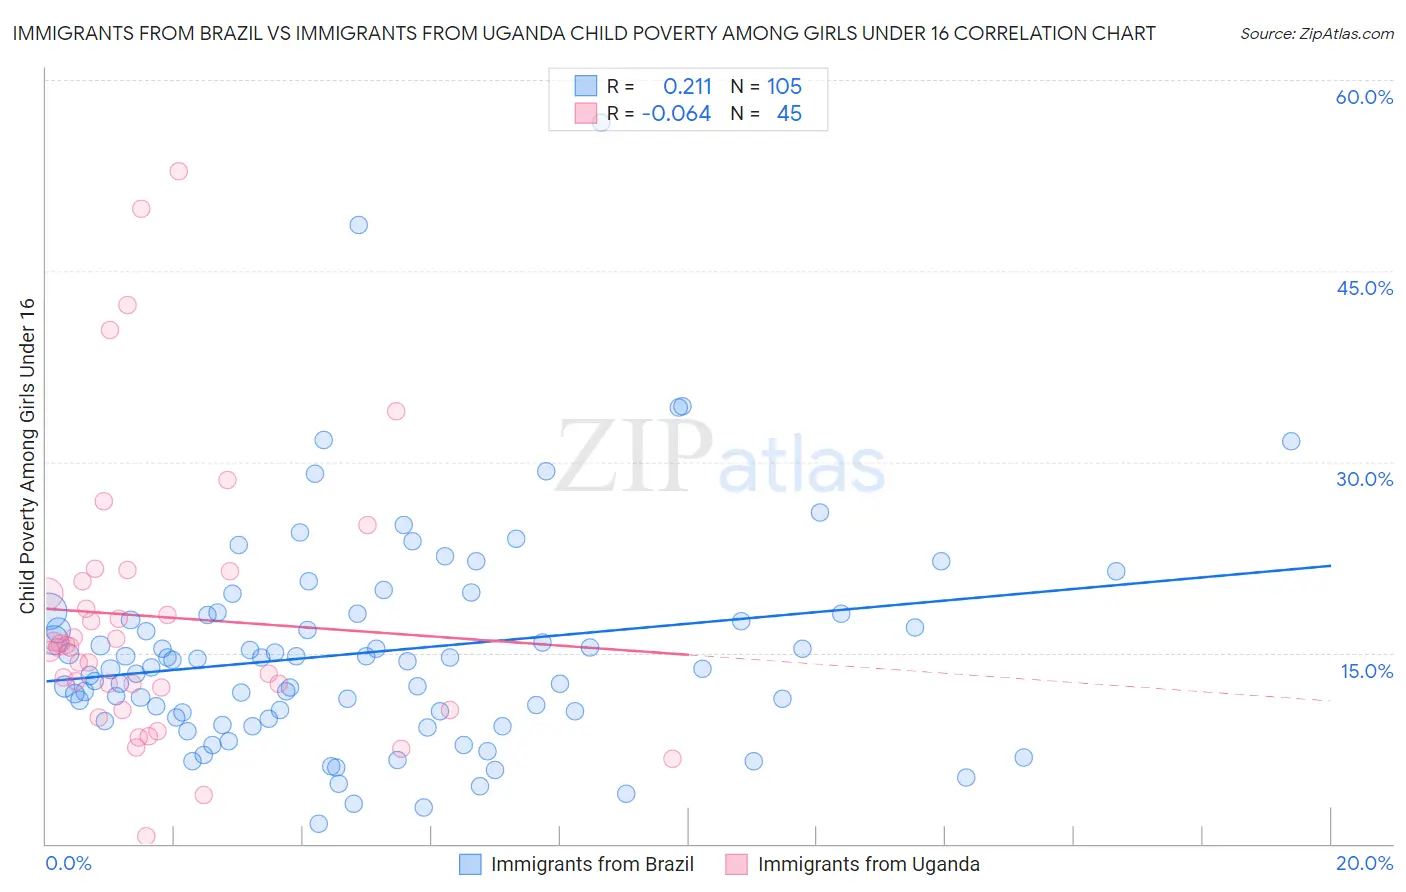 Immigrants from Brazil vs Immigrants from Uganda Child Poverty Among Girls Under 16